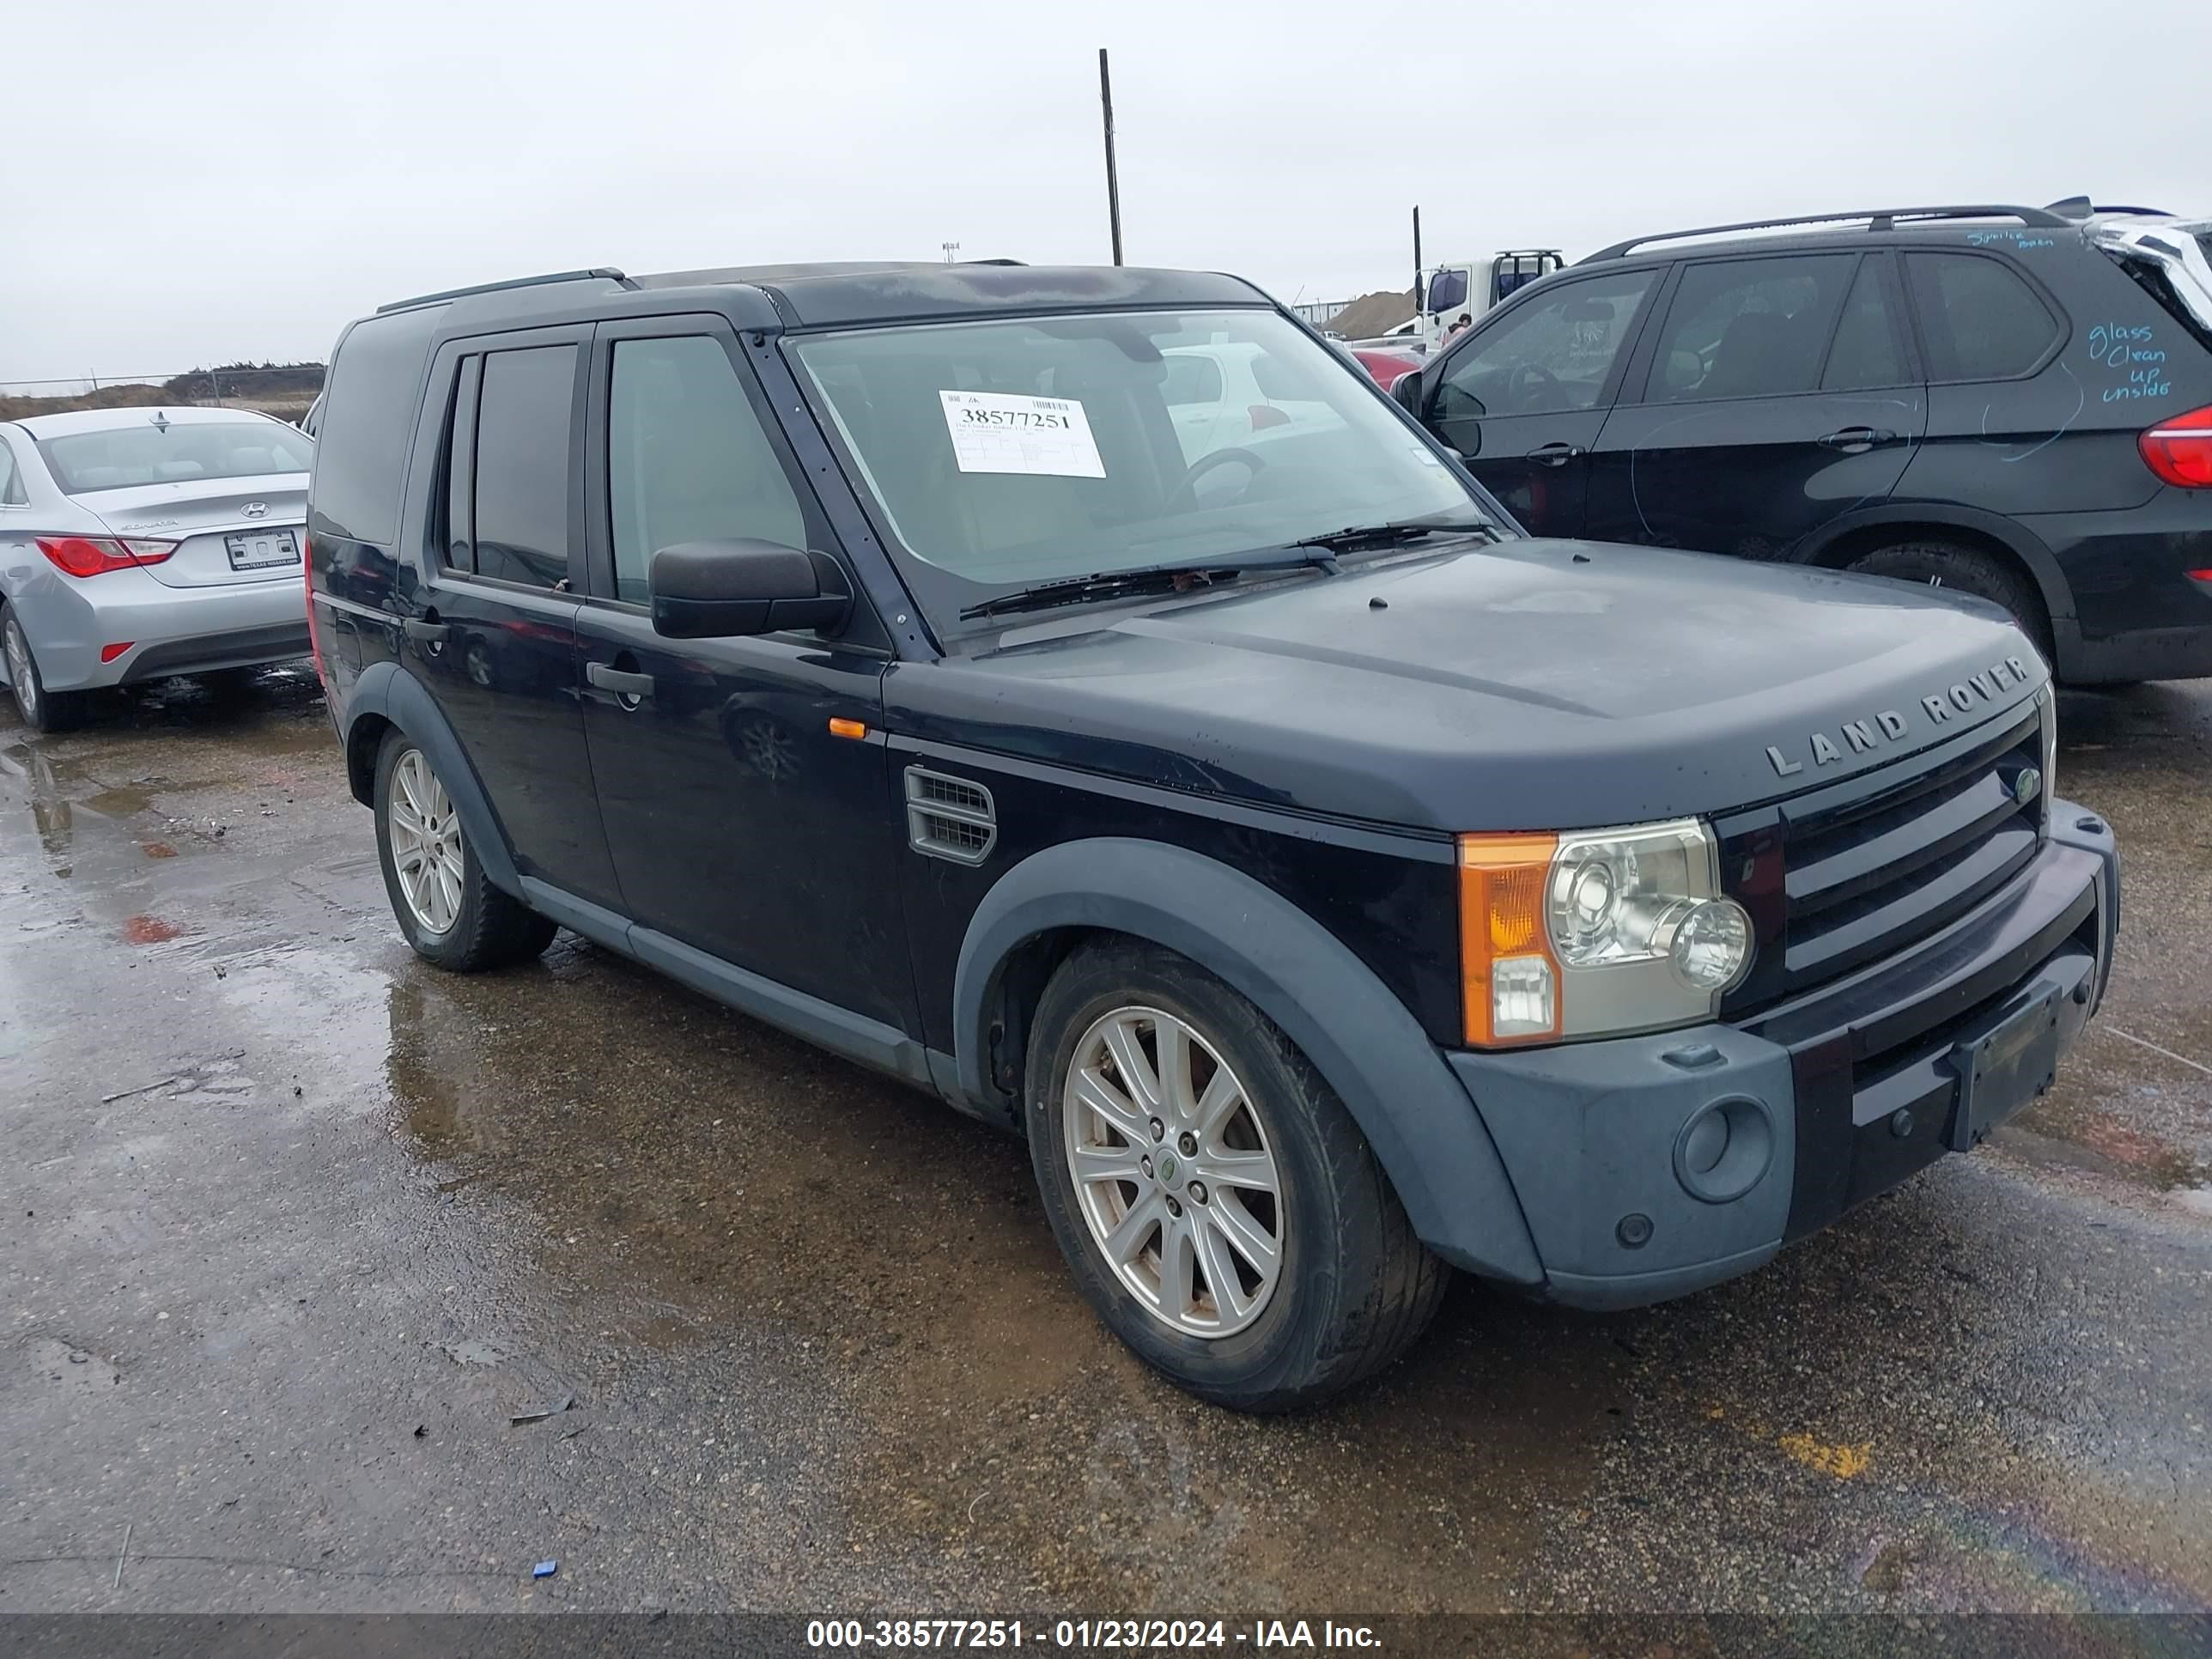 vin: SALAE25467A418699 SALAE25467A418699 2007 land rover lr3 4400 for Sale in 76247, 3748 Mcpherson Dr, Justin, Texas, USA